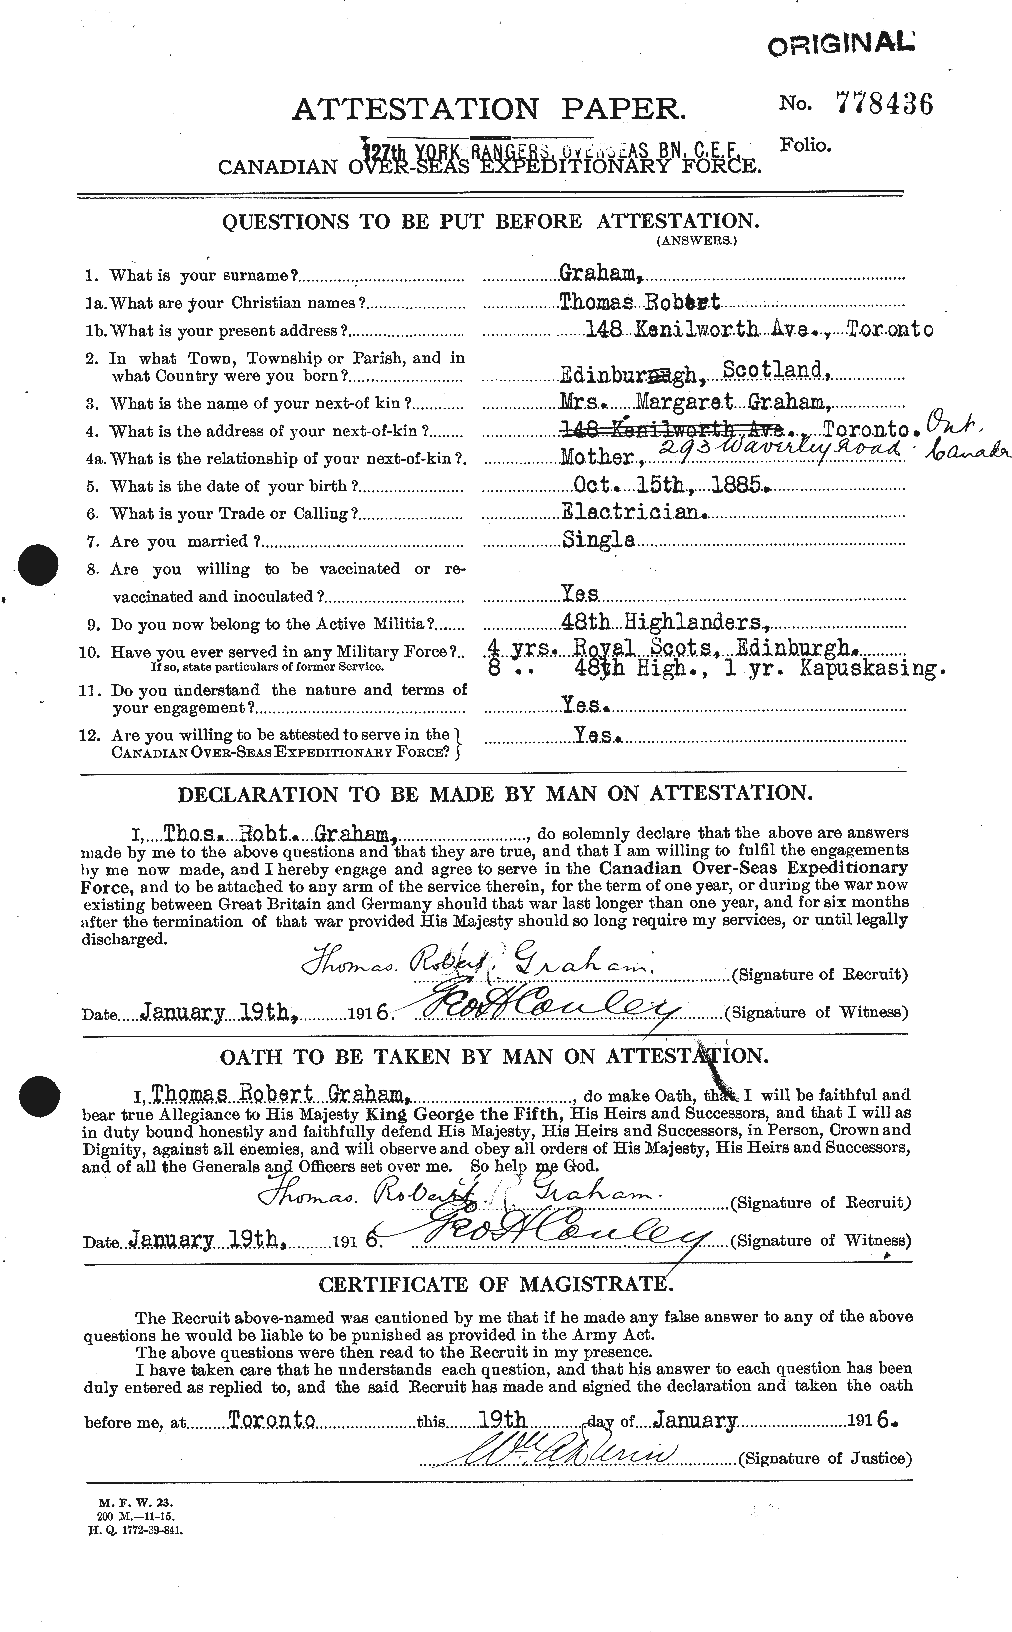 Personnel Records of the First World War - CEF 359527a